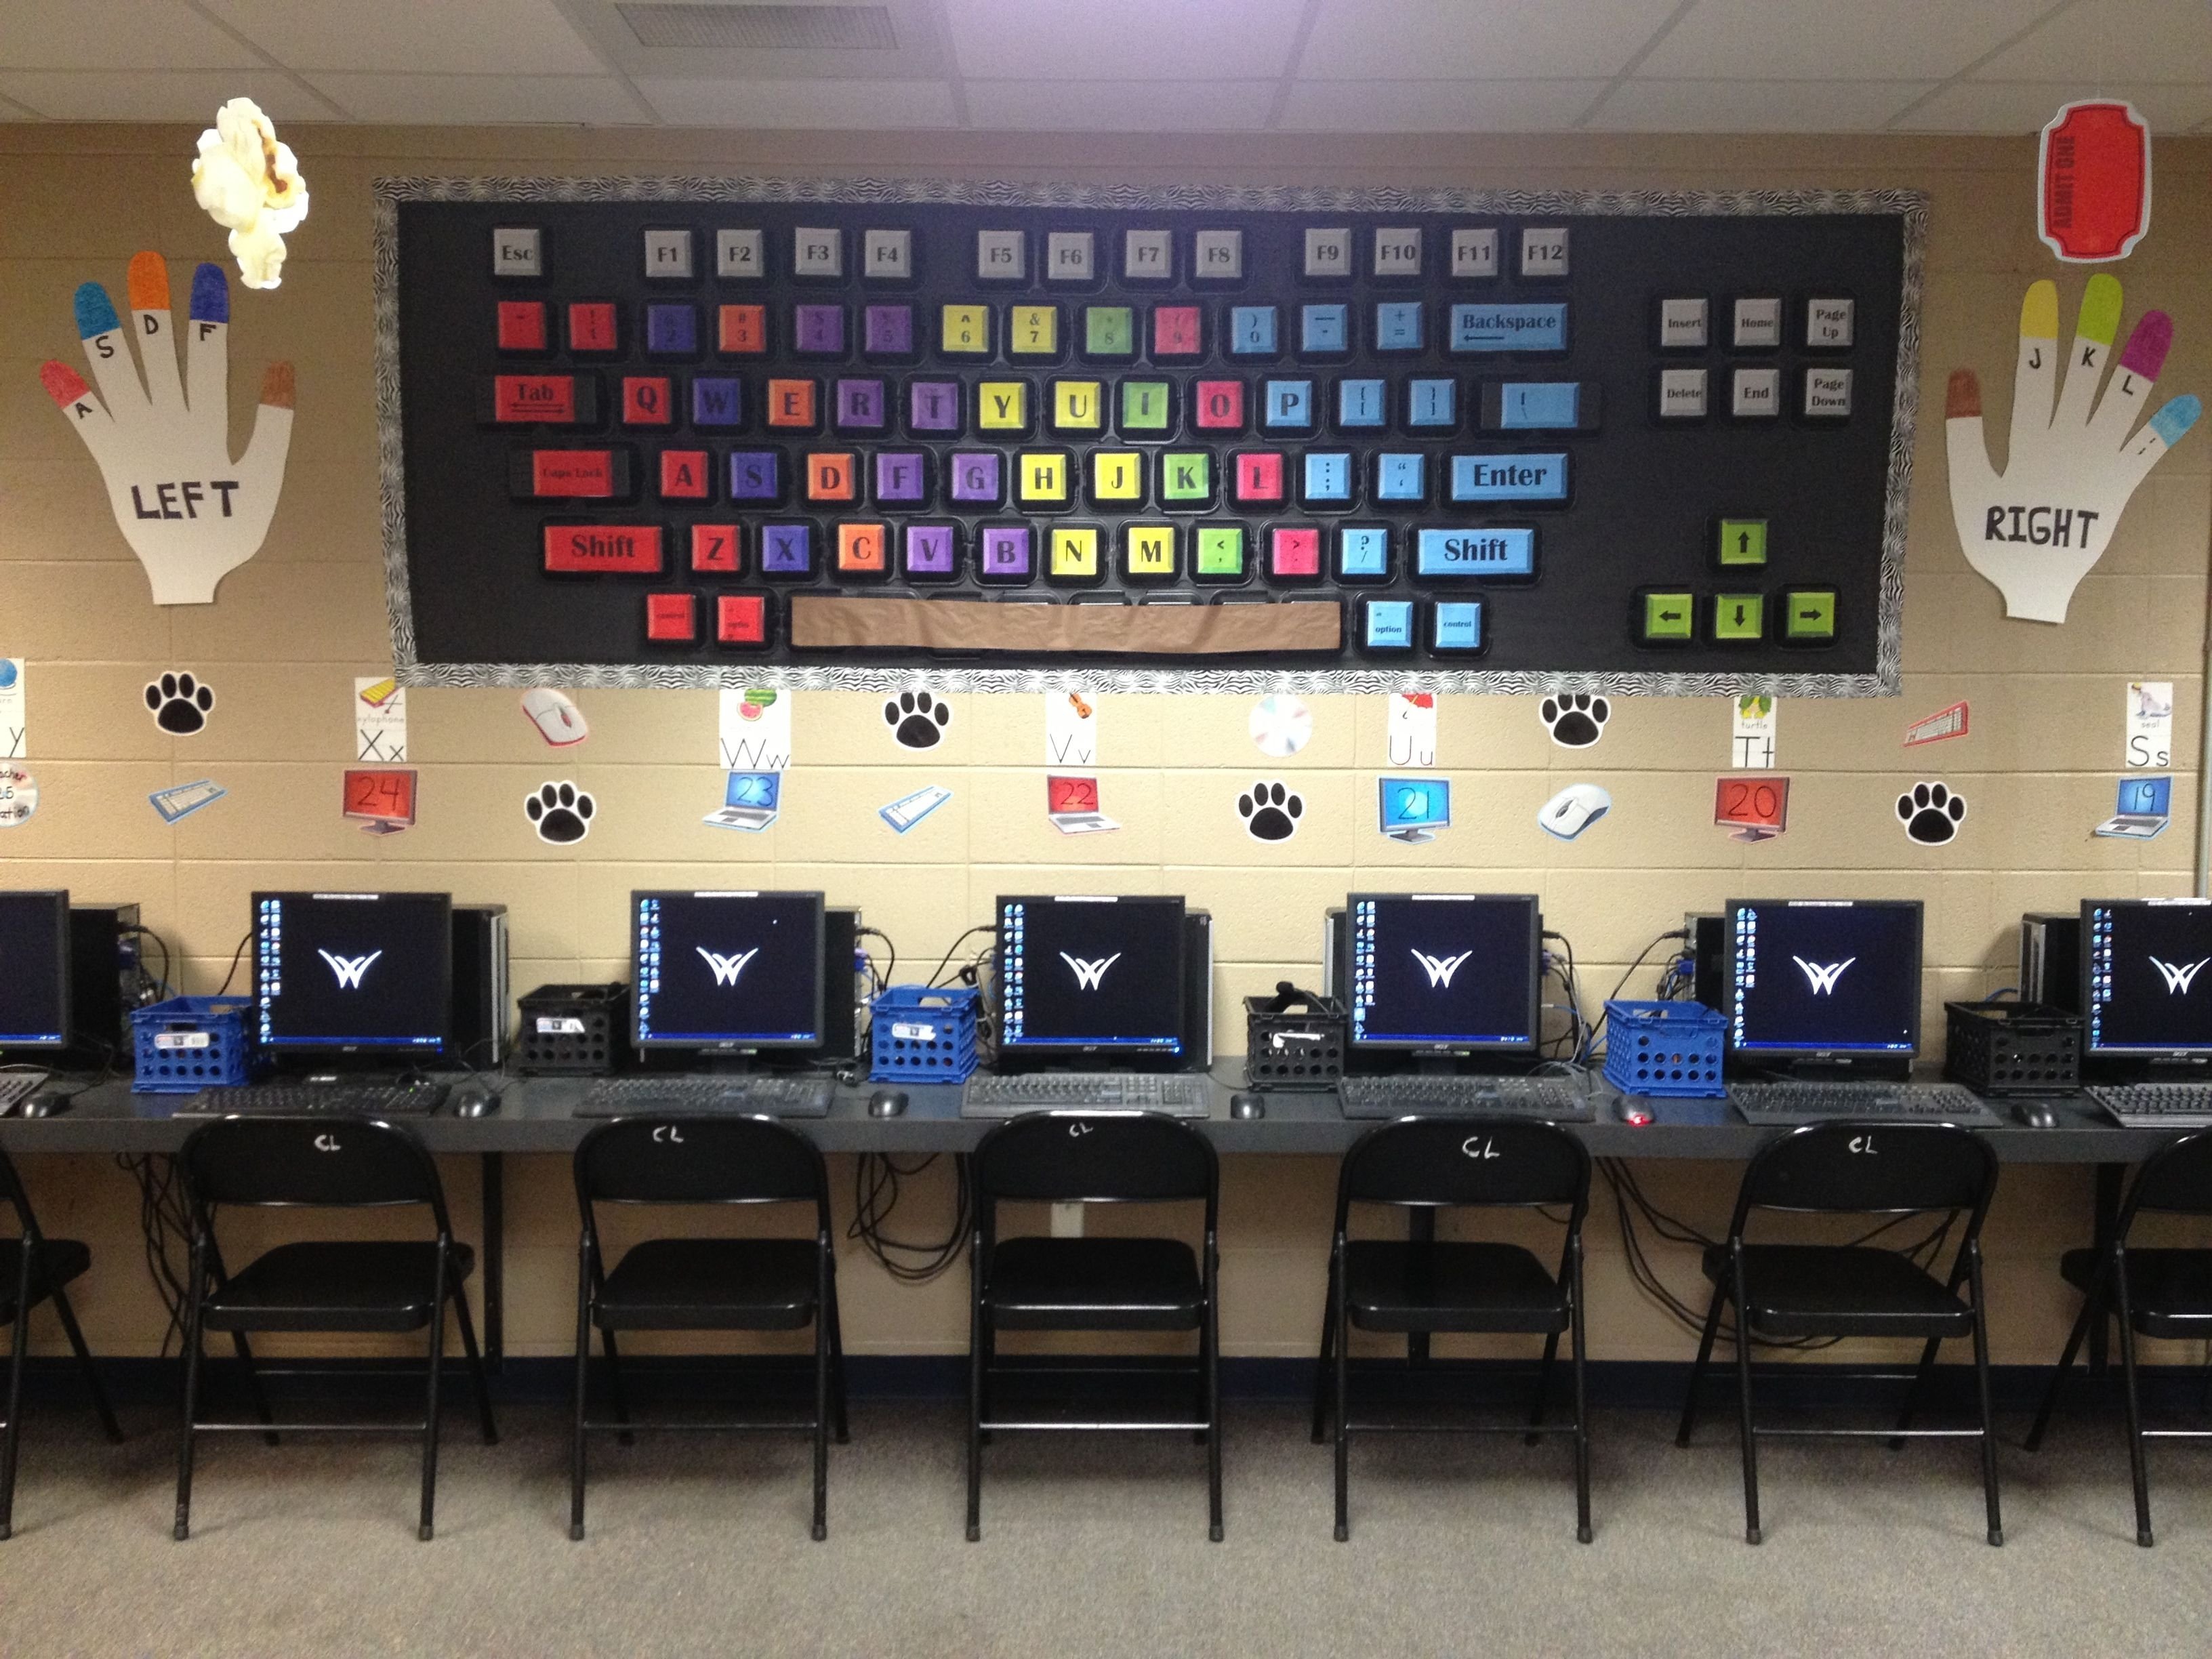 10 Stylish Technology In The Classroom Ideas classroom decoration ideas for high school computer lab google 2022